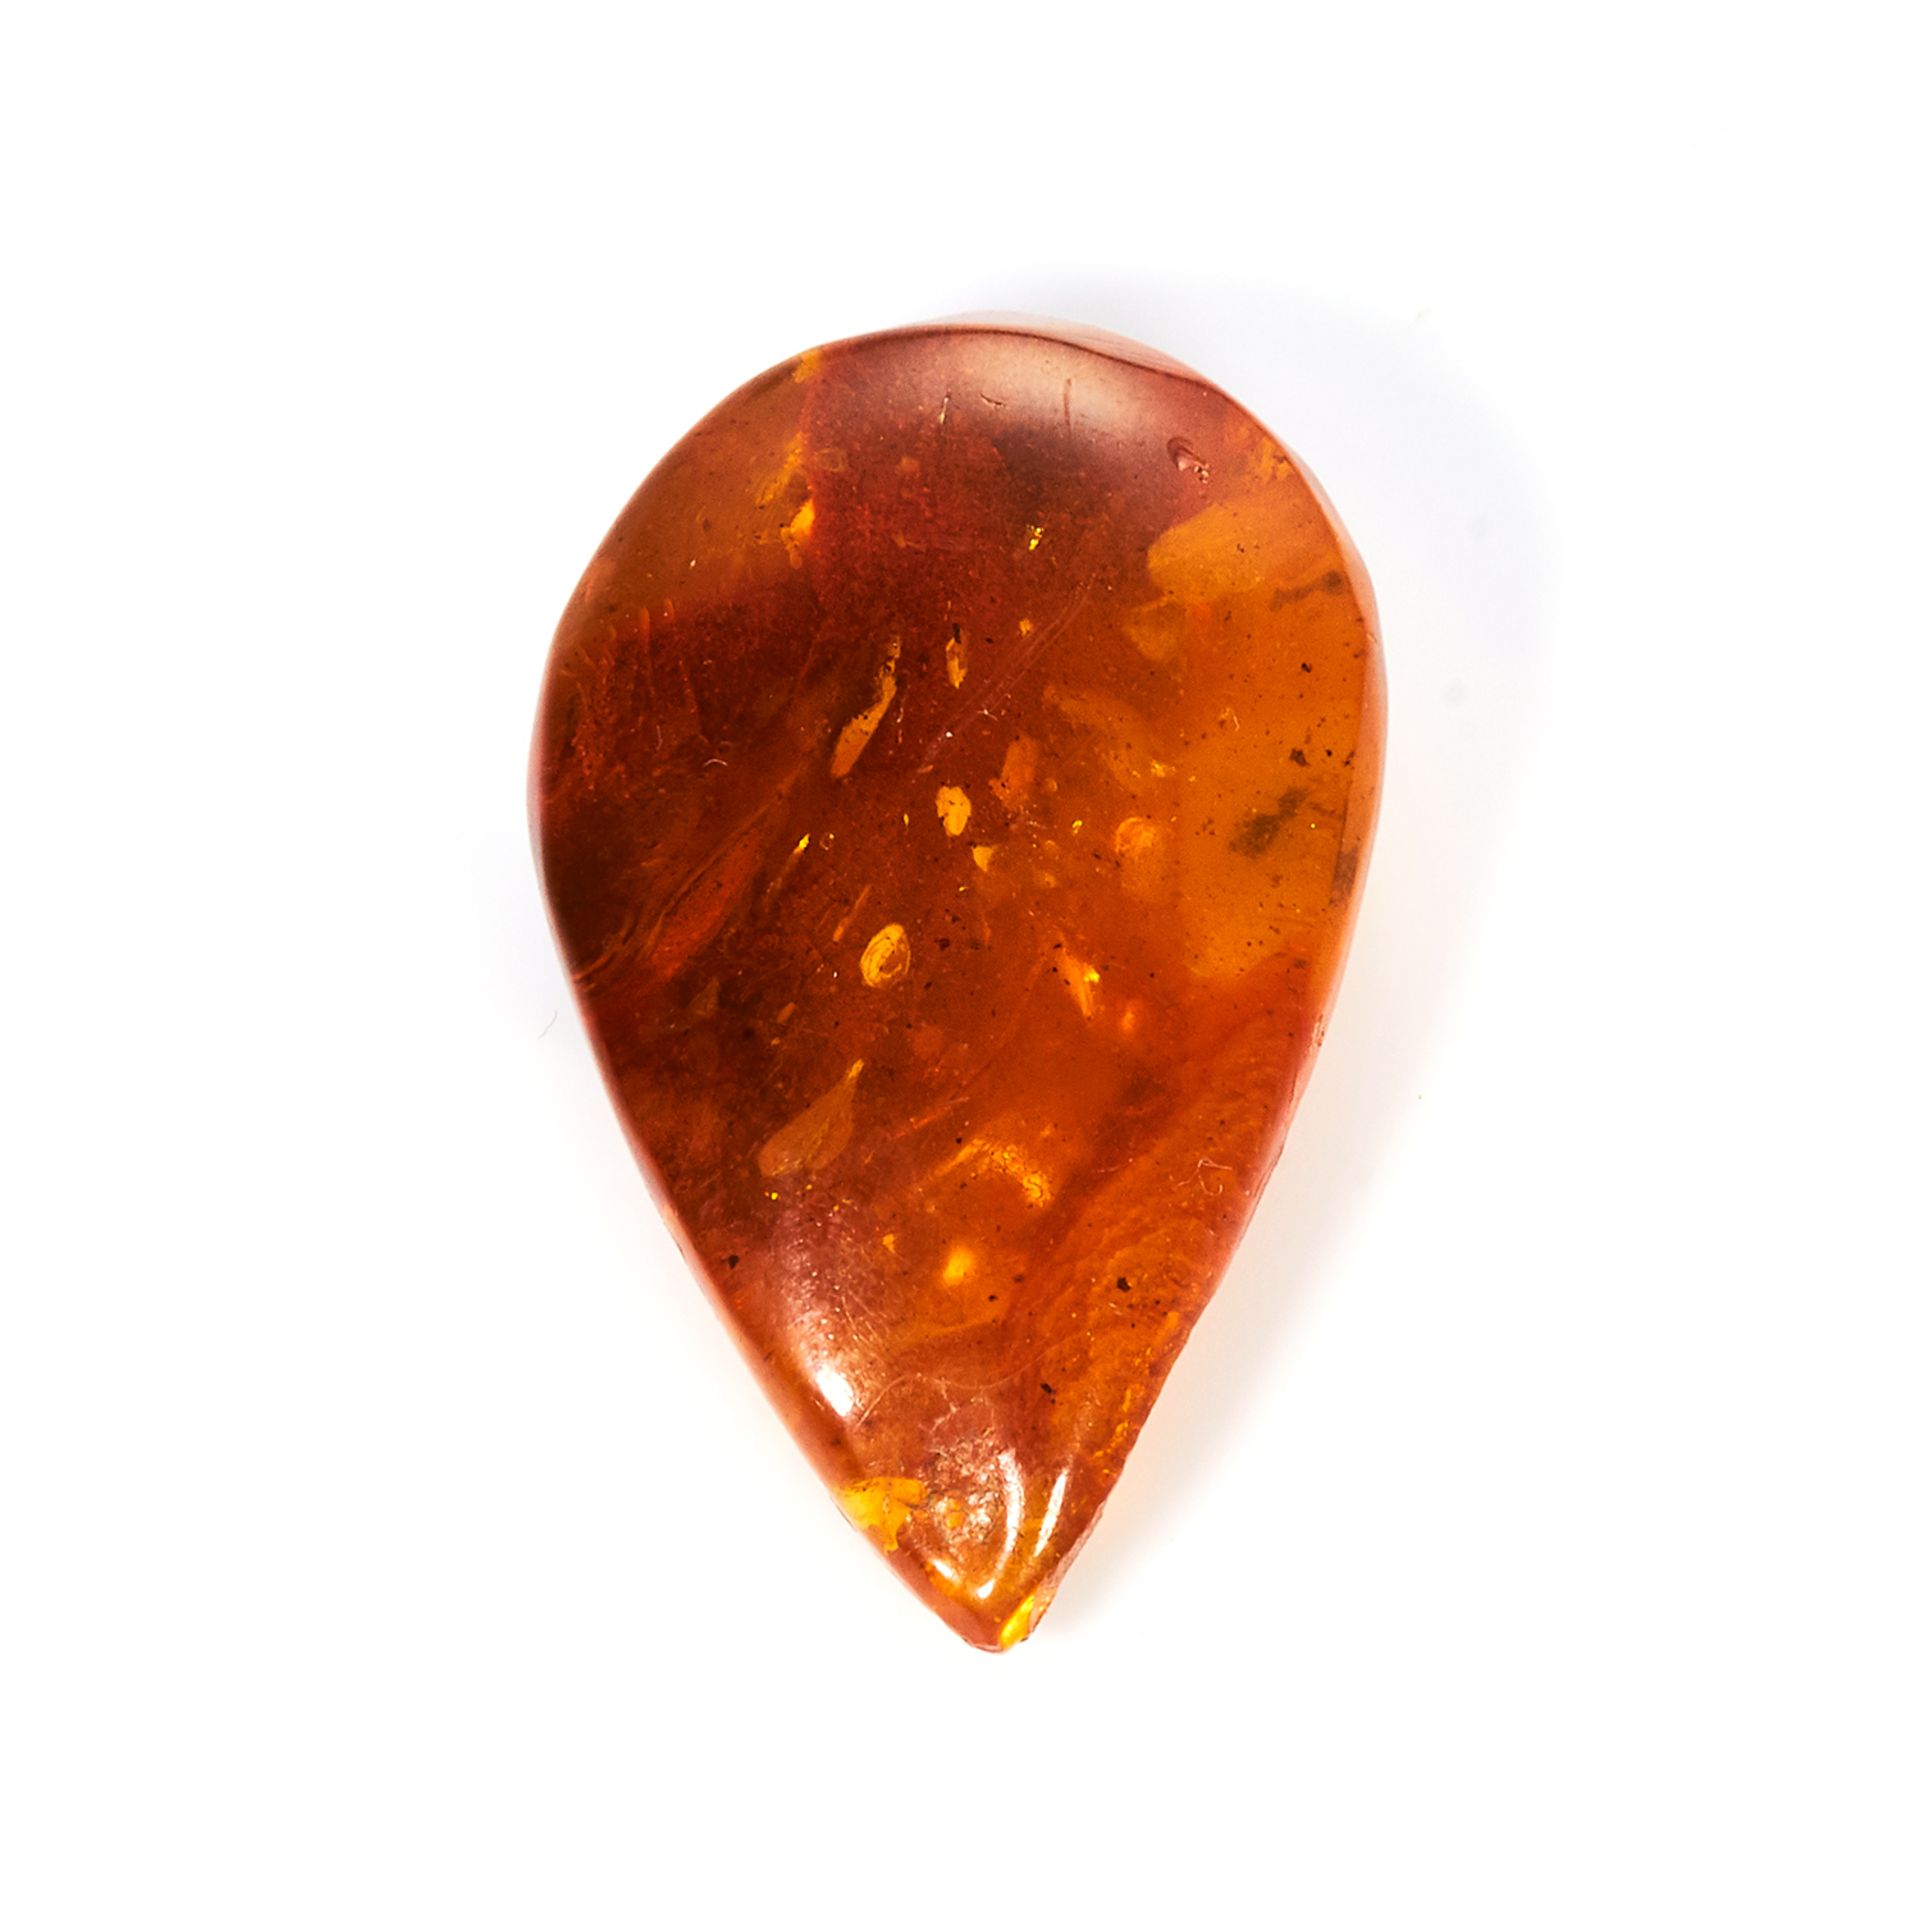 A POLISHED AMBER JEWEL WEIGHING 8.75g.